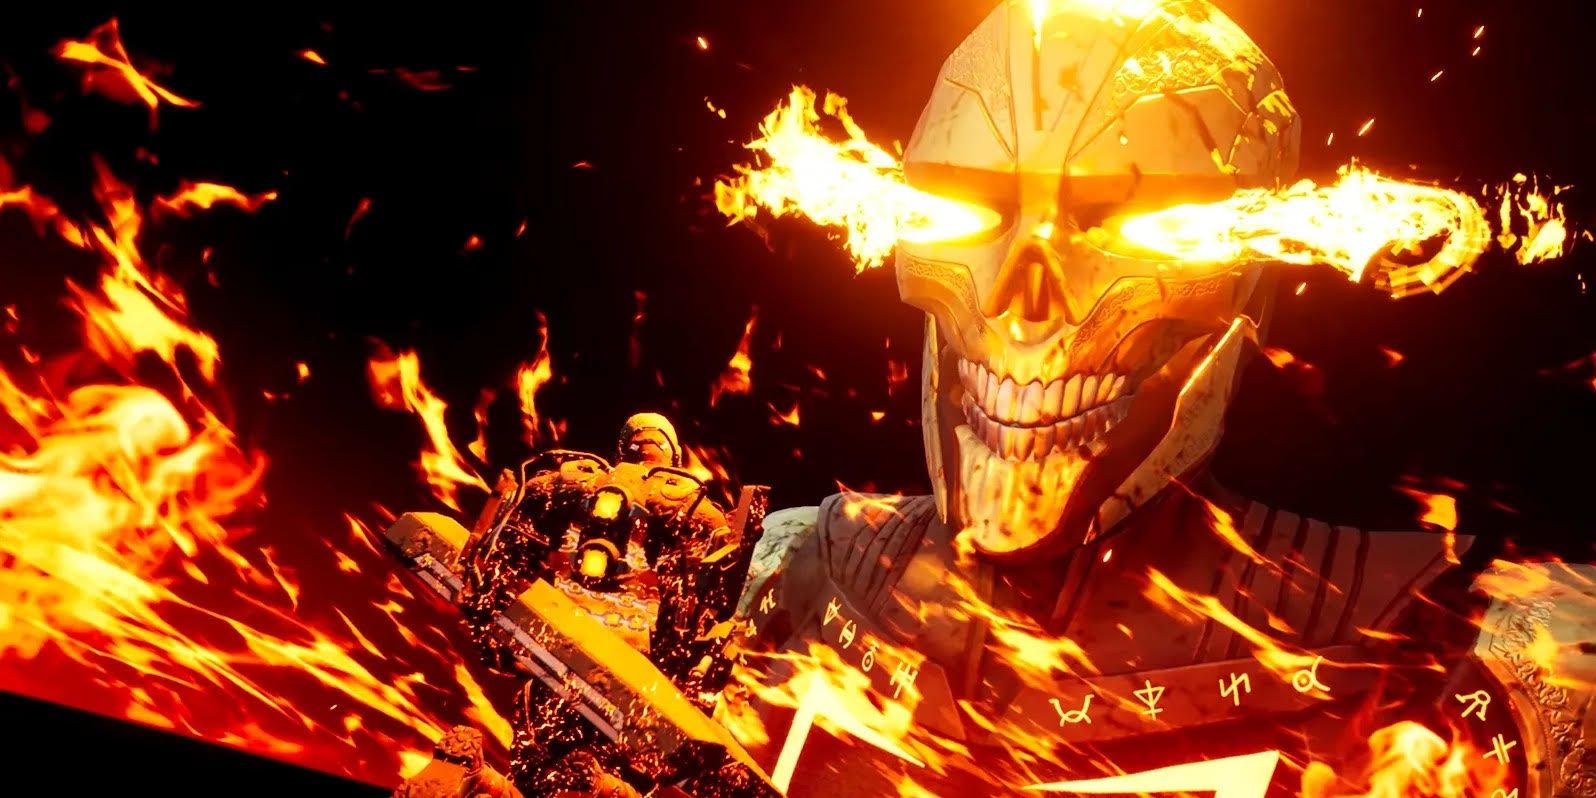 ghost rider surrounded by flames and glowing armor